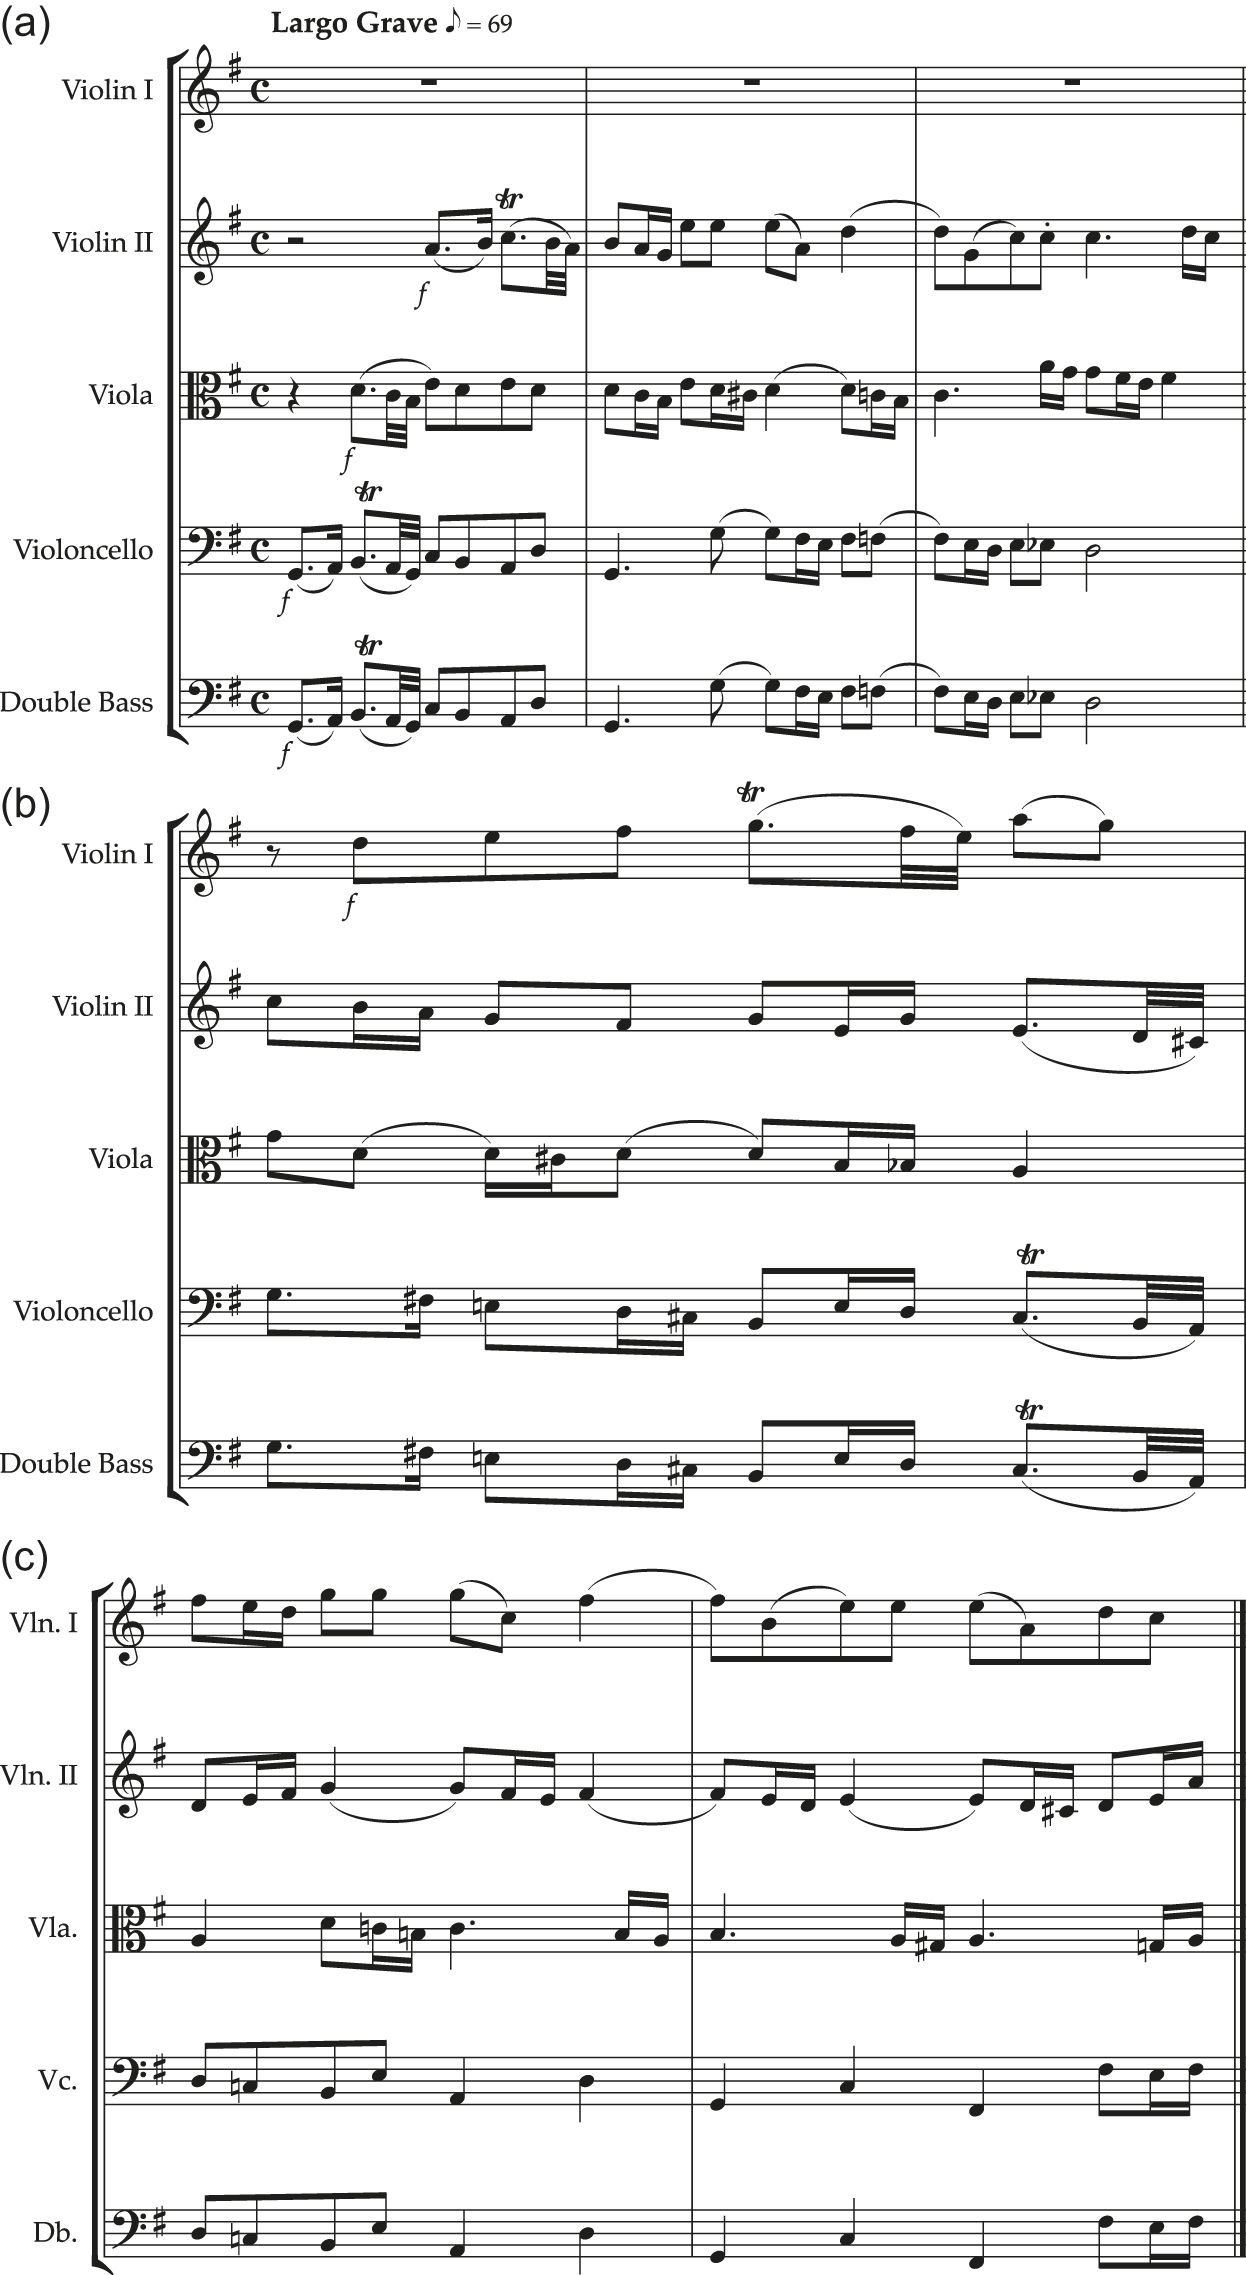 Hide and Seek Trumpet Trio Sheet music for Trumpet in b-flat (Mixed Trio)